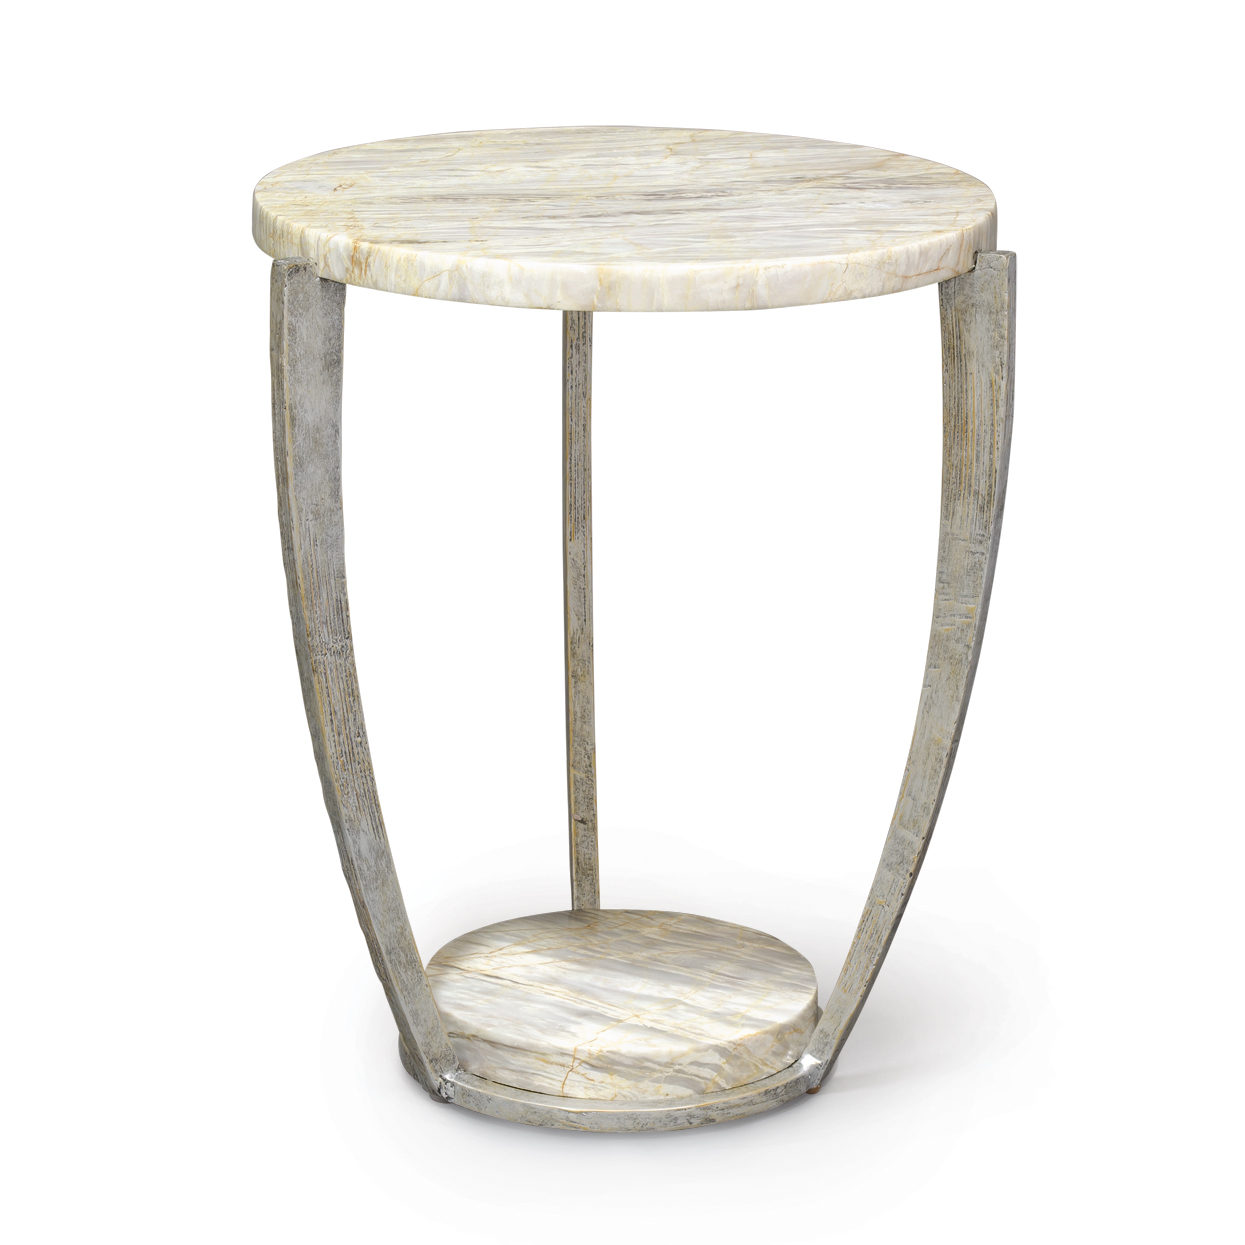 exciting marble accent table set bistro threshold top wood round small antique and faux killian target metal black white nero full size country end tables gold leaf coffee glass